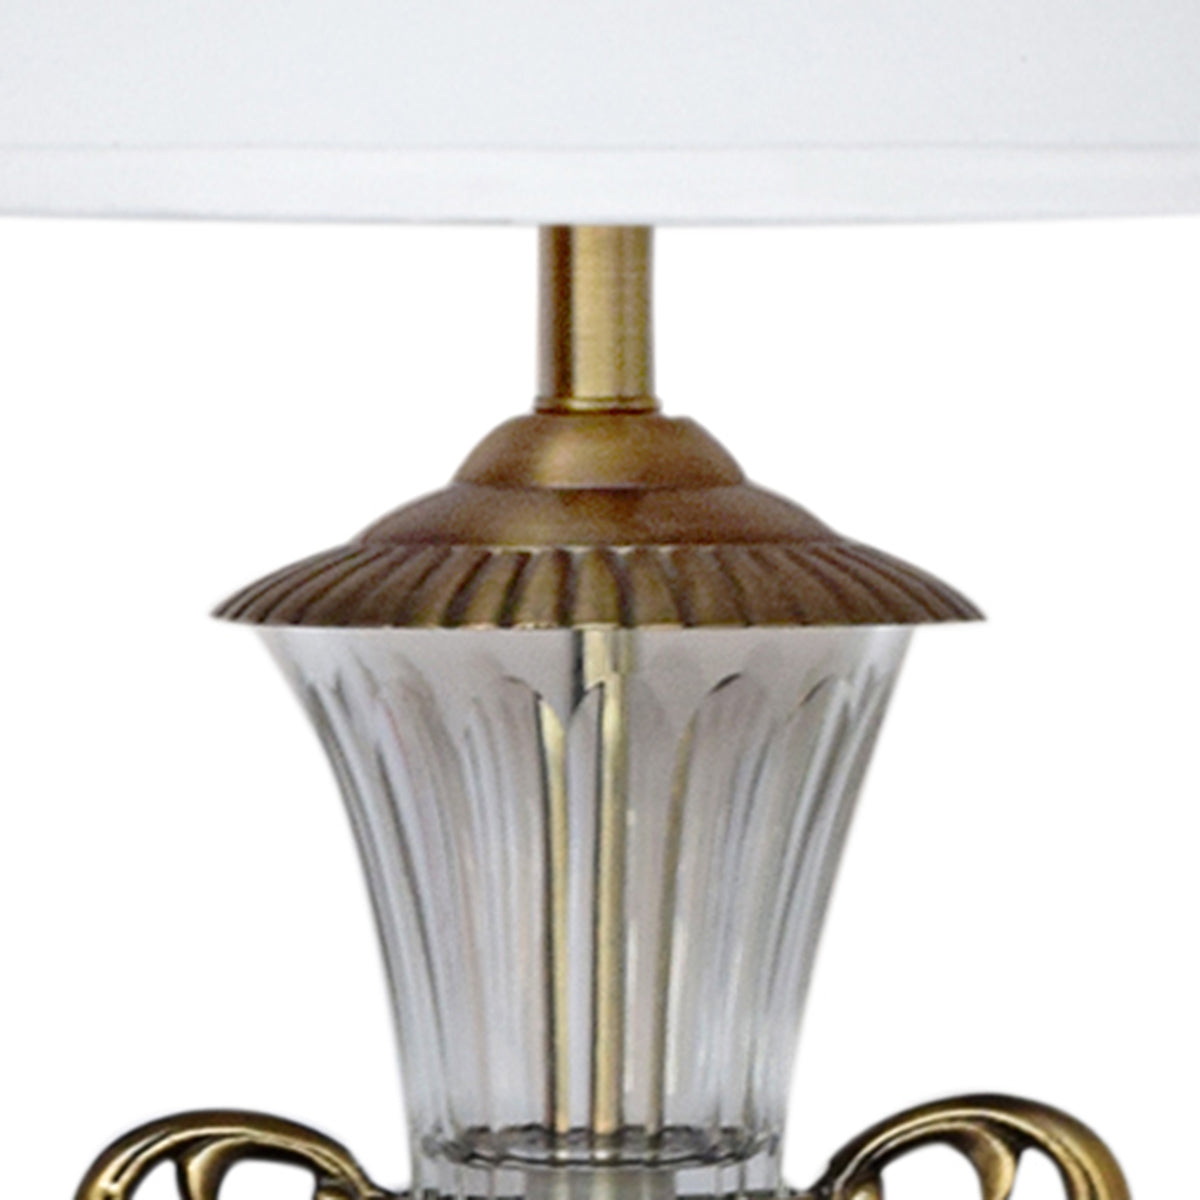 Detec White Fabric Shade With Brass Table Lamp